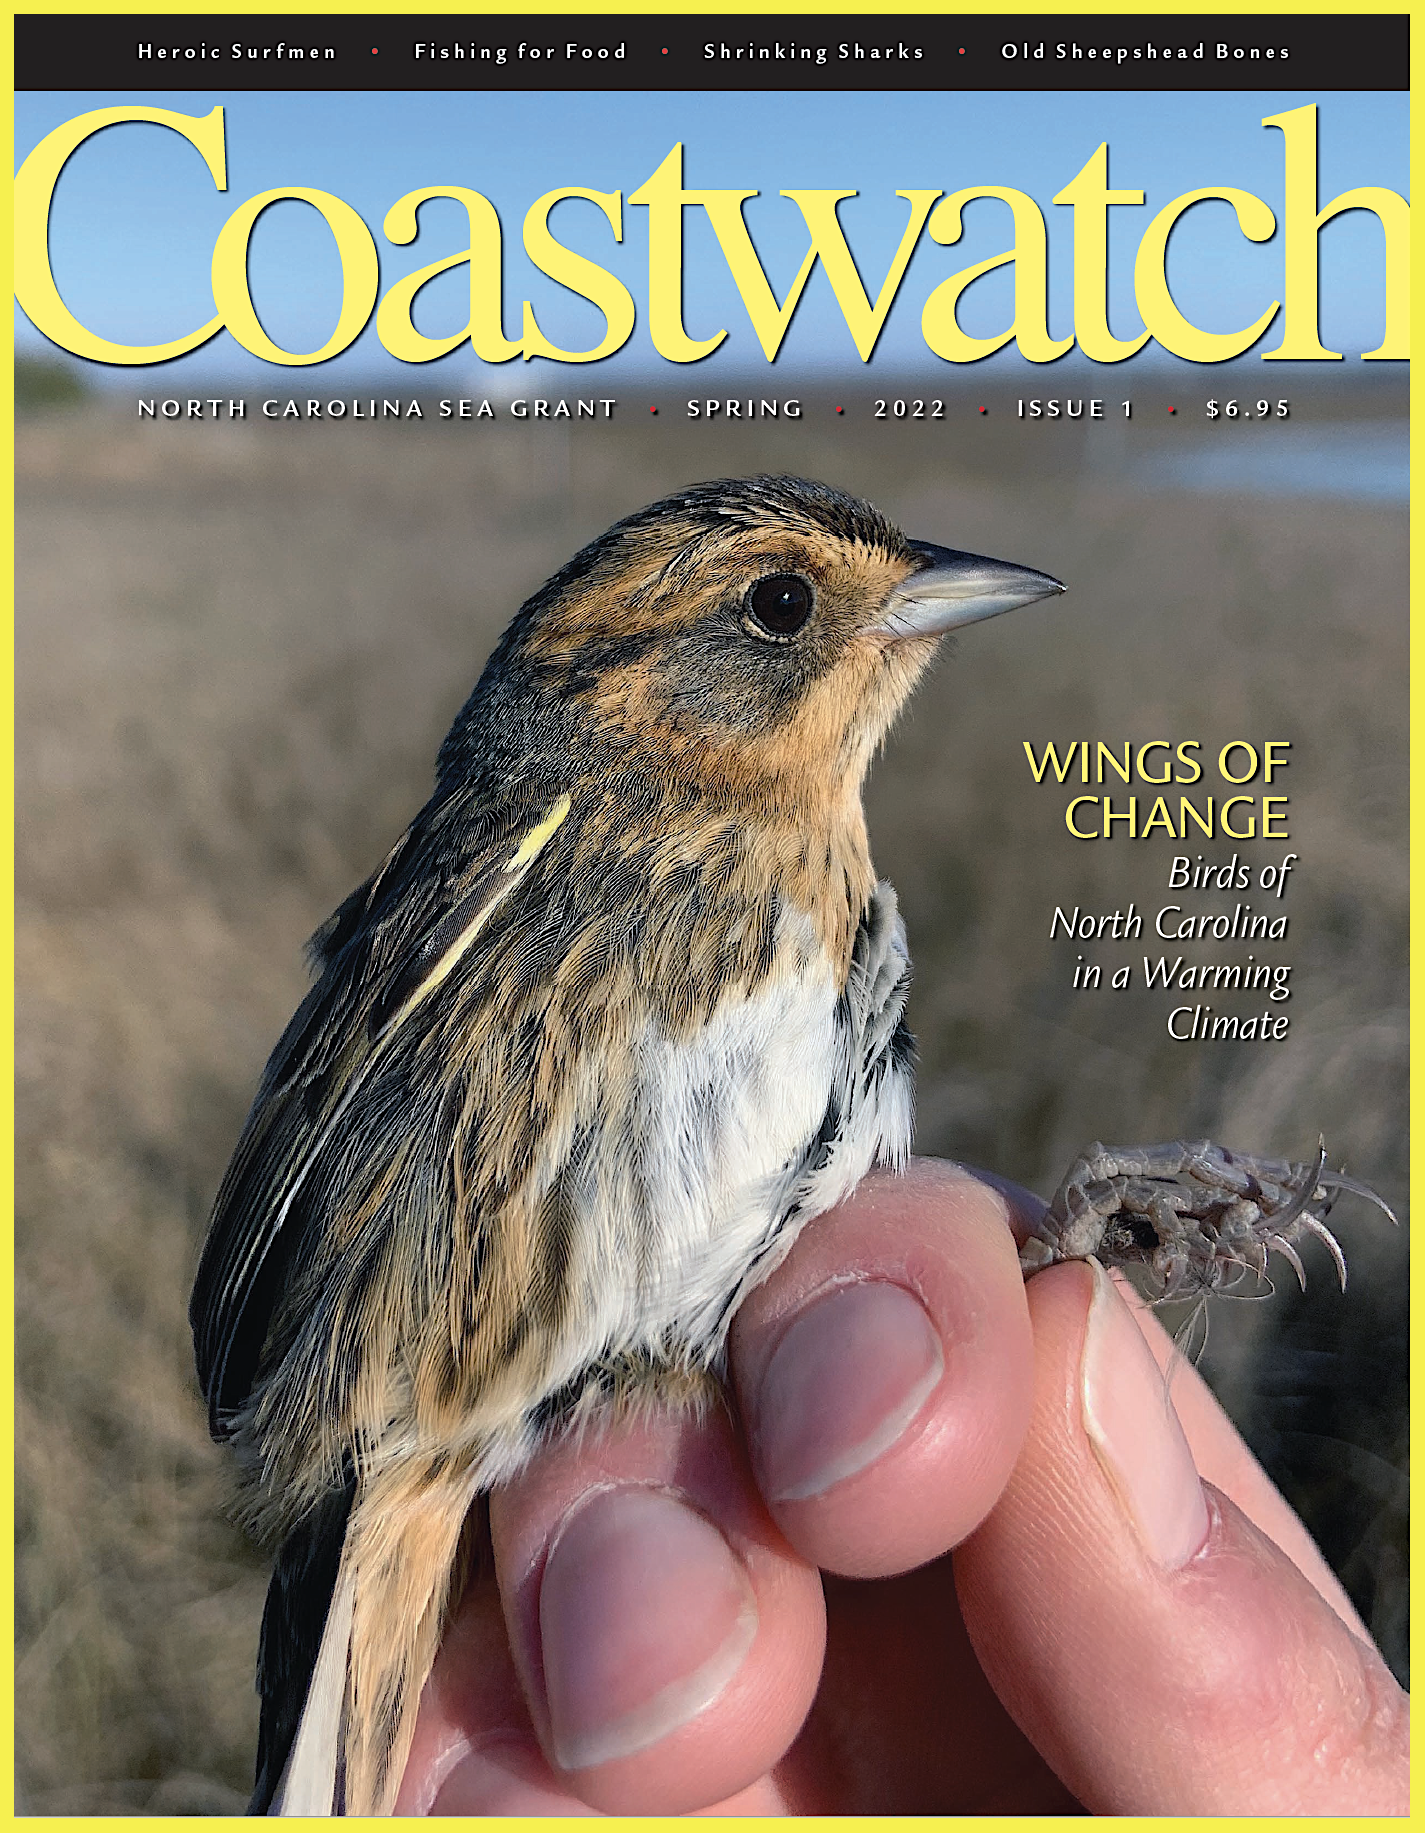 image: Coastwatch cover.